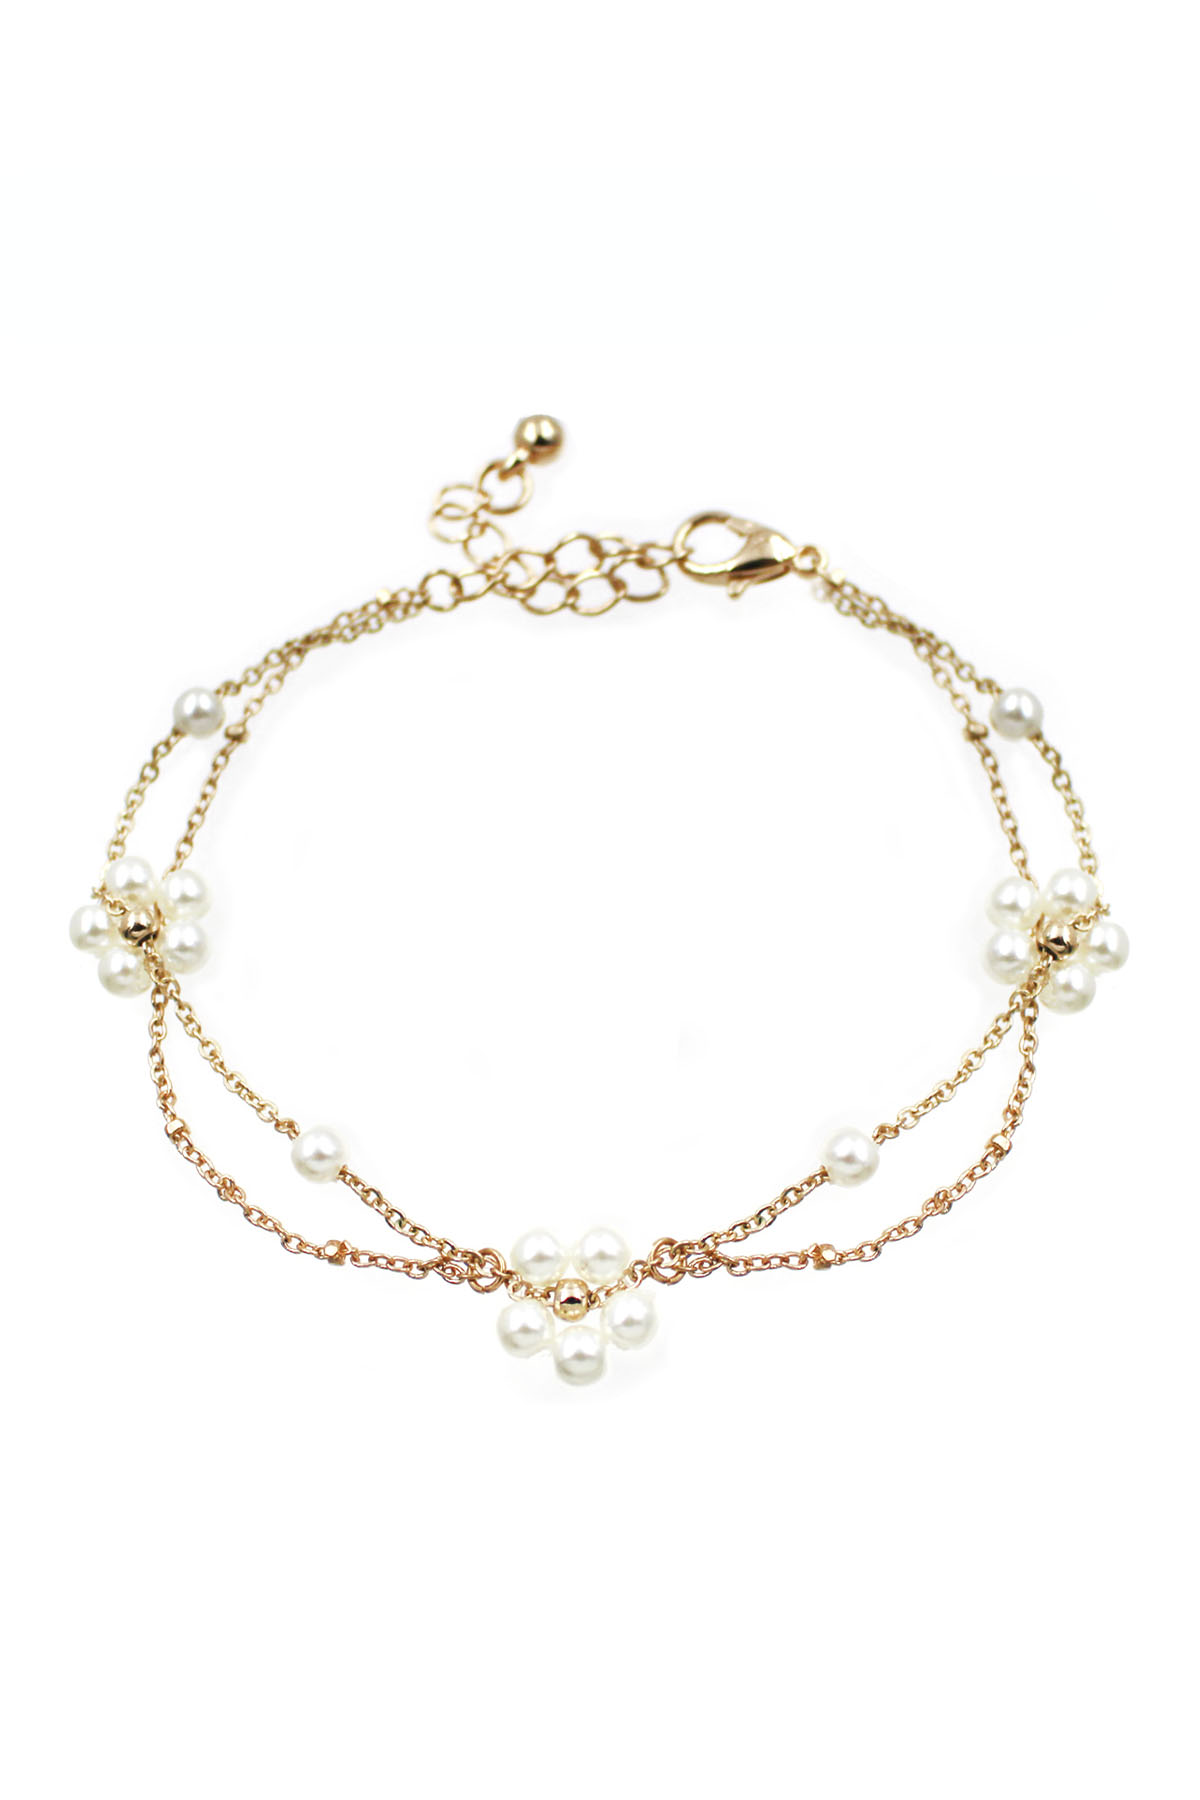 METAL LAYERED CHAIN FLOWER PEARL BARCELET